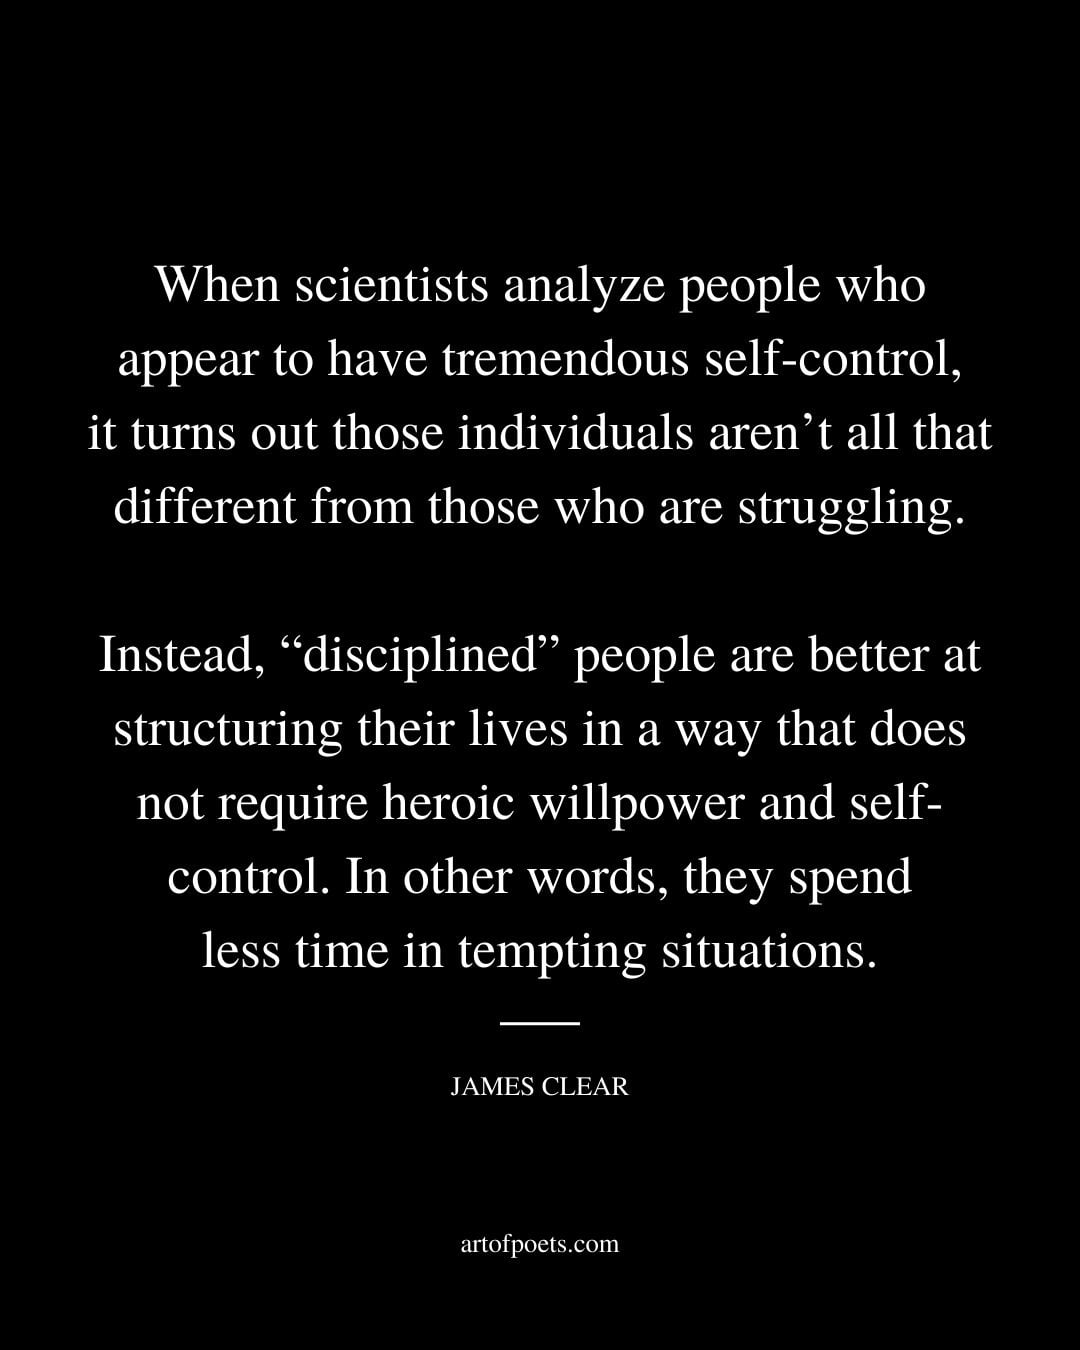 When scientists analyze people who appear to have tremendous self control it turns out those individuals arent all that different from those who are struggling